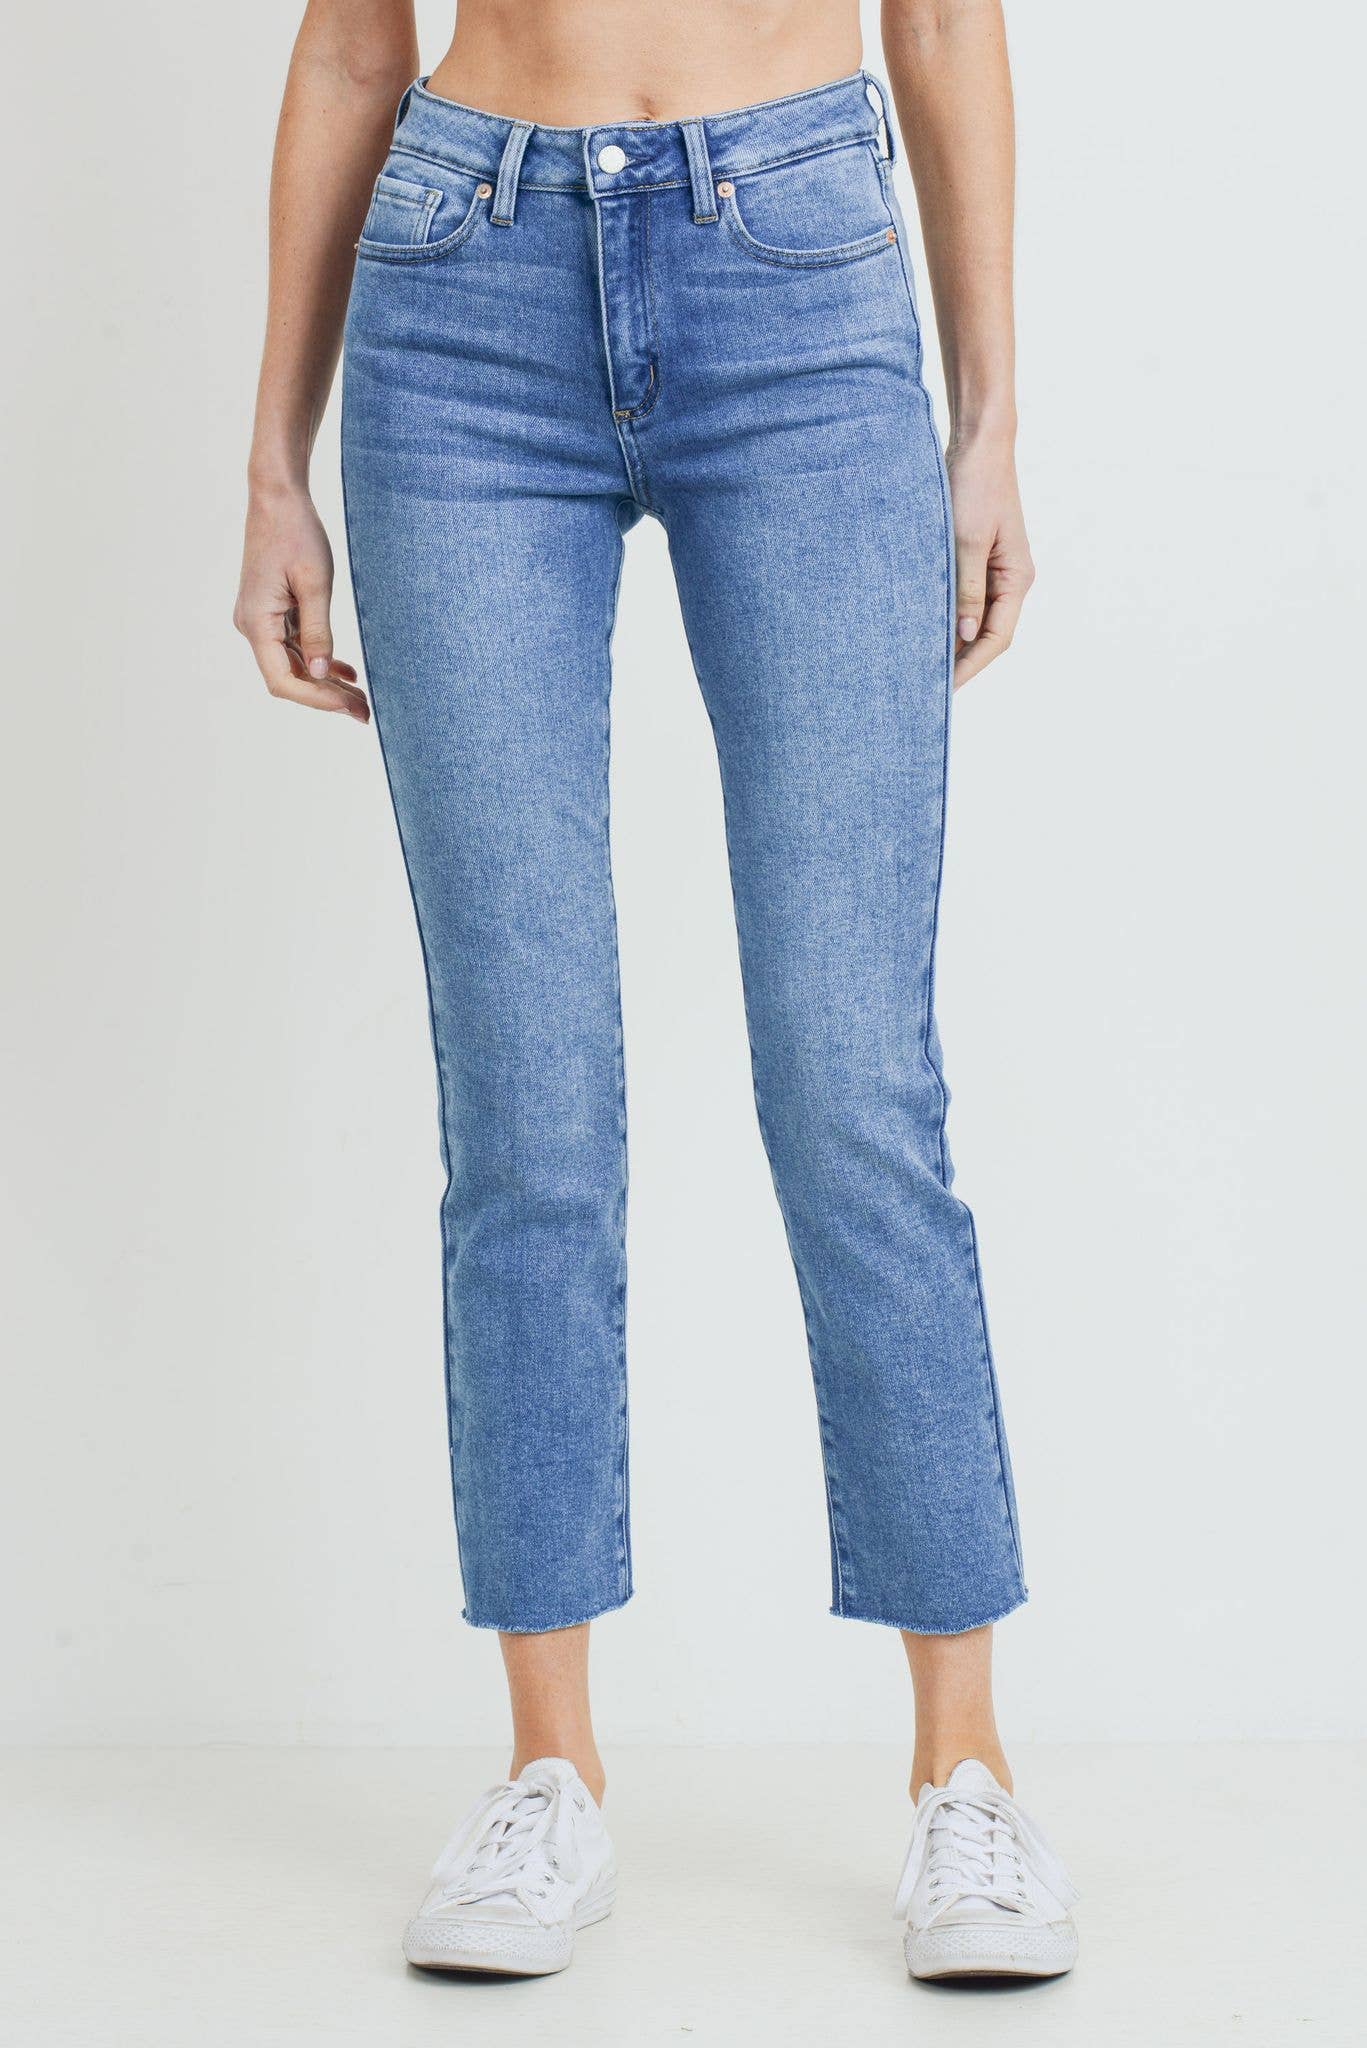 baggy jeans with heels